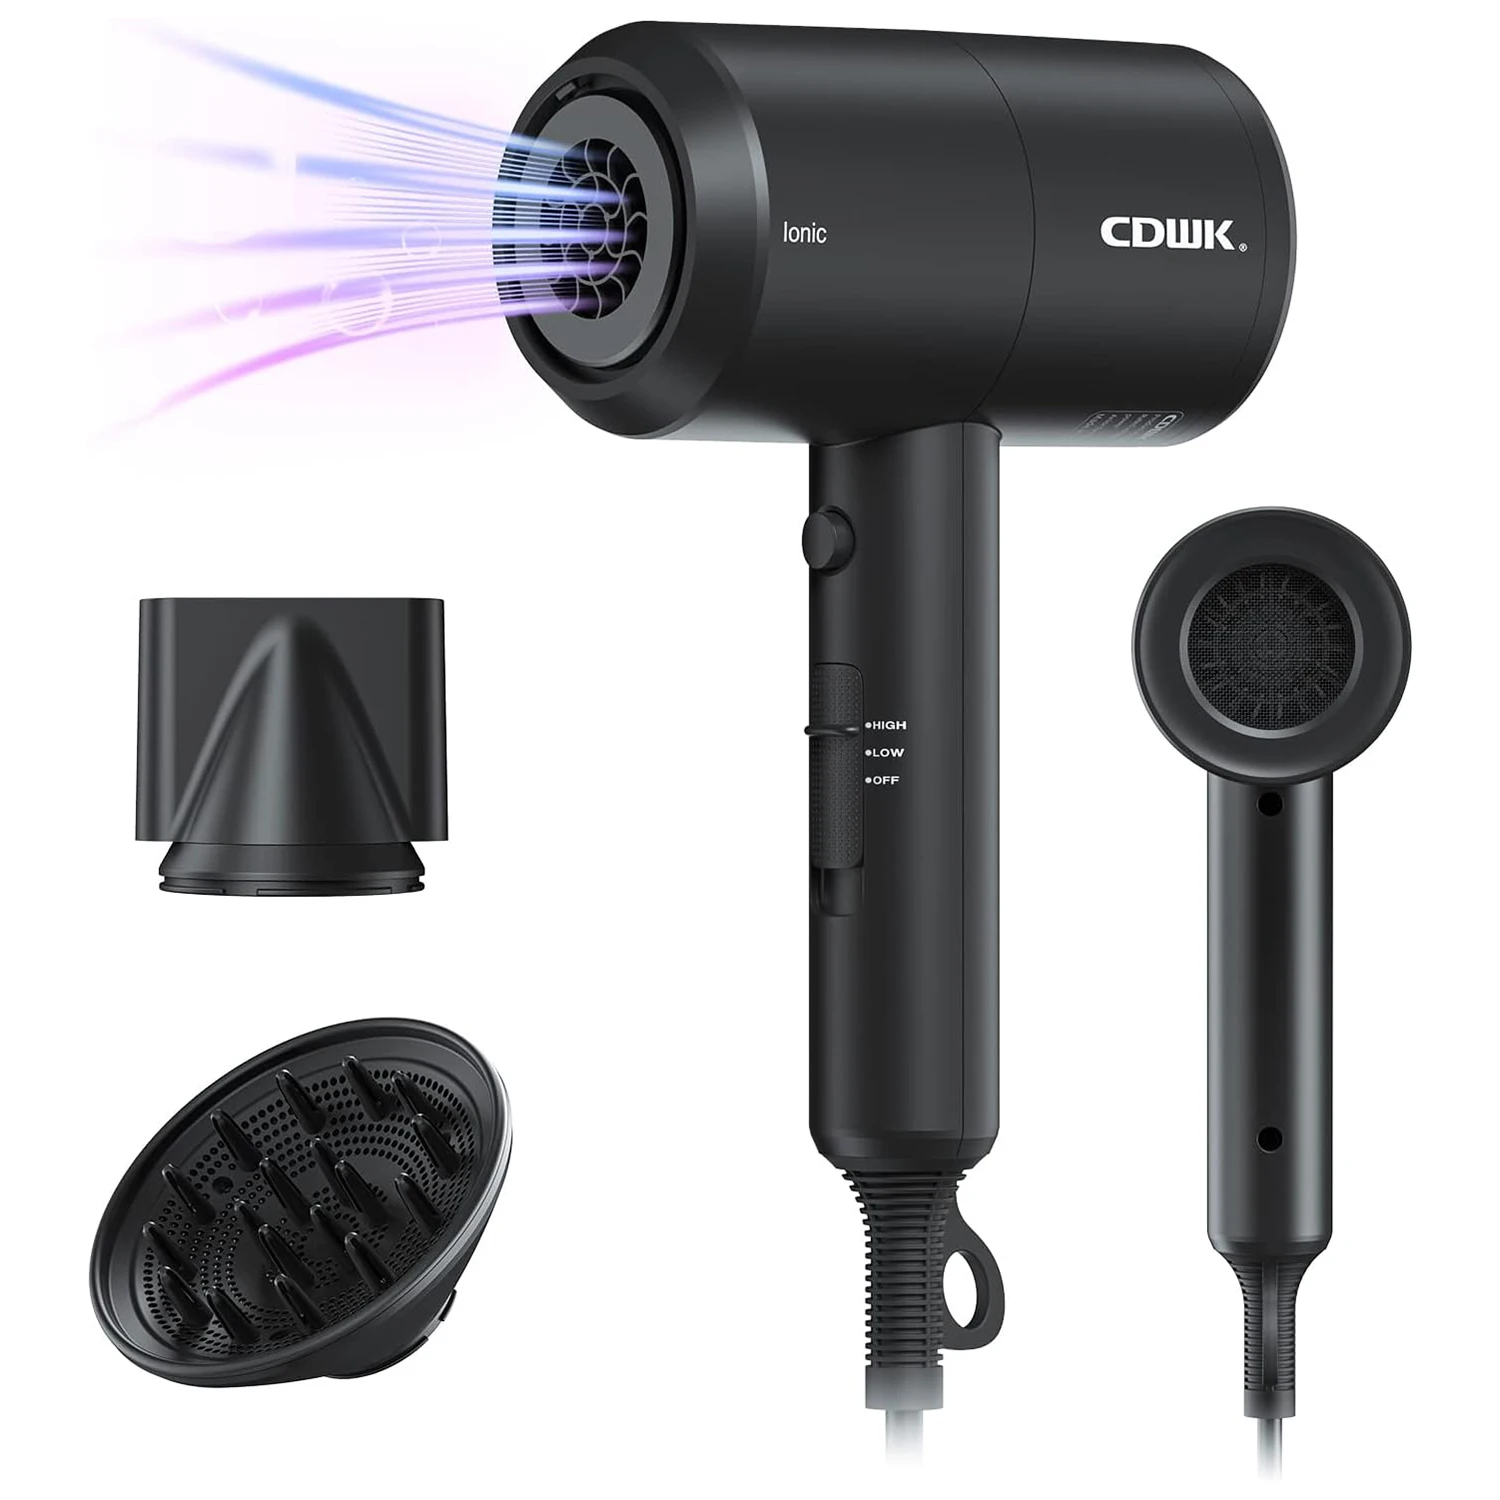 Professional Ionic Negative Hair Dryer with Diffuser 1800W Fast Drying Hair Dryers for Curly Straight Hair Travel Portable ecoflow delta 2 portable power station 1024wh lifepo4 battery solar generator 1800w ac output expandable capacity 15 outputs app control charge to 80% in 50 mins